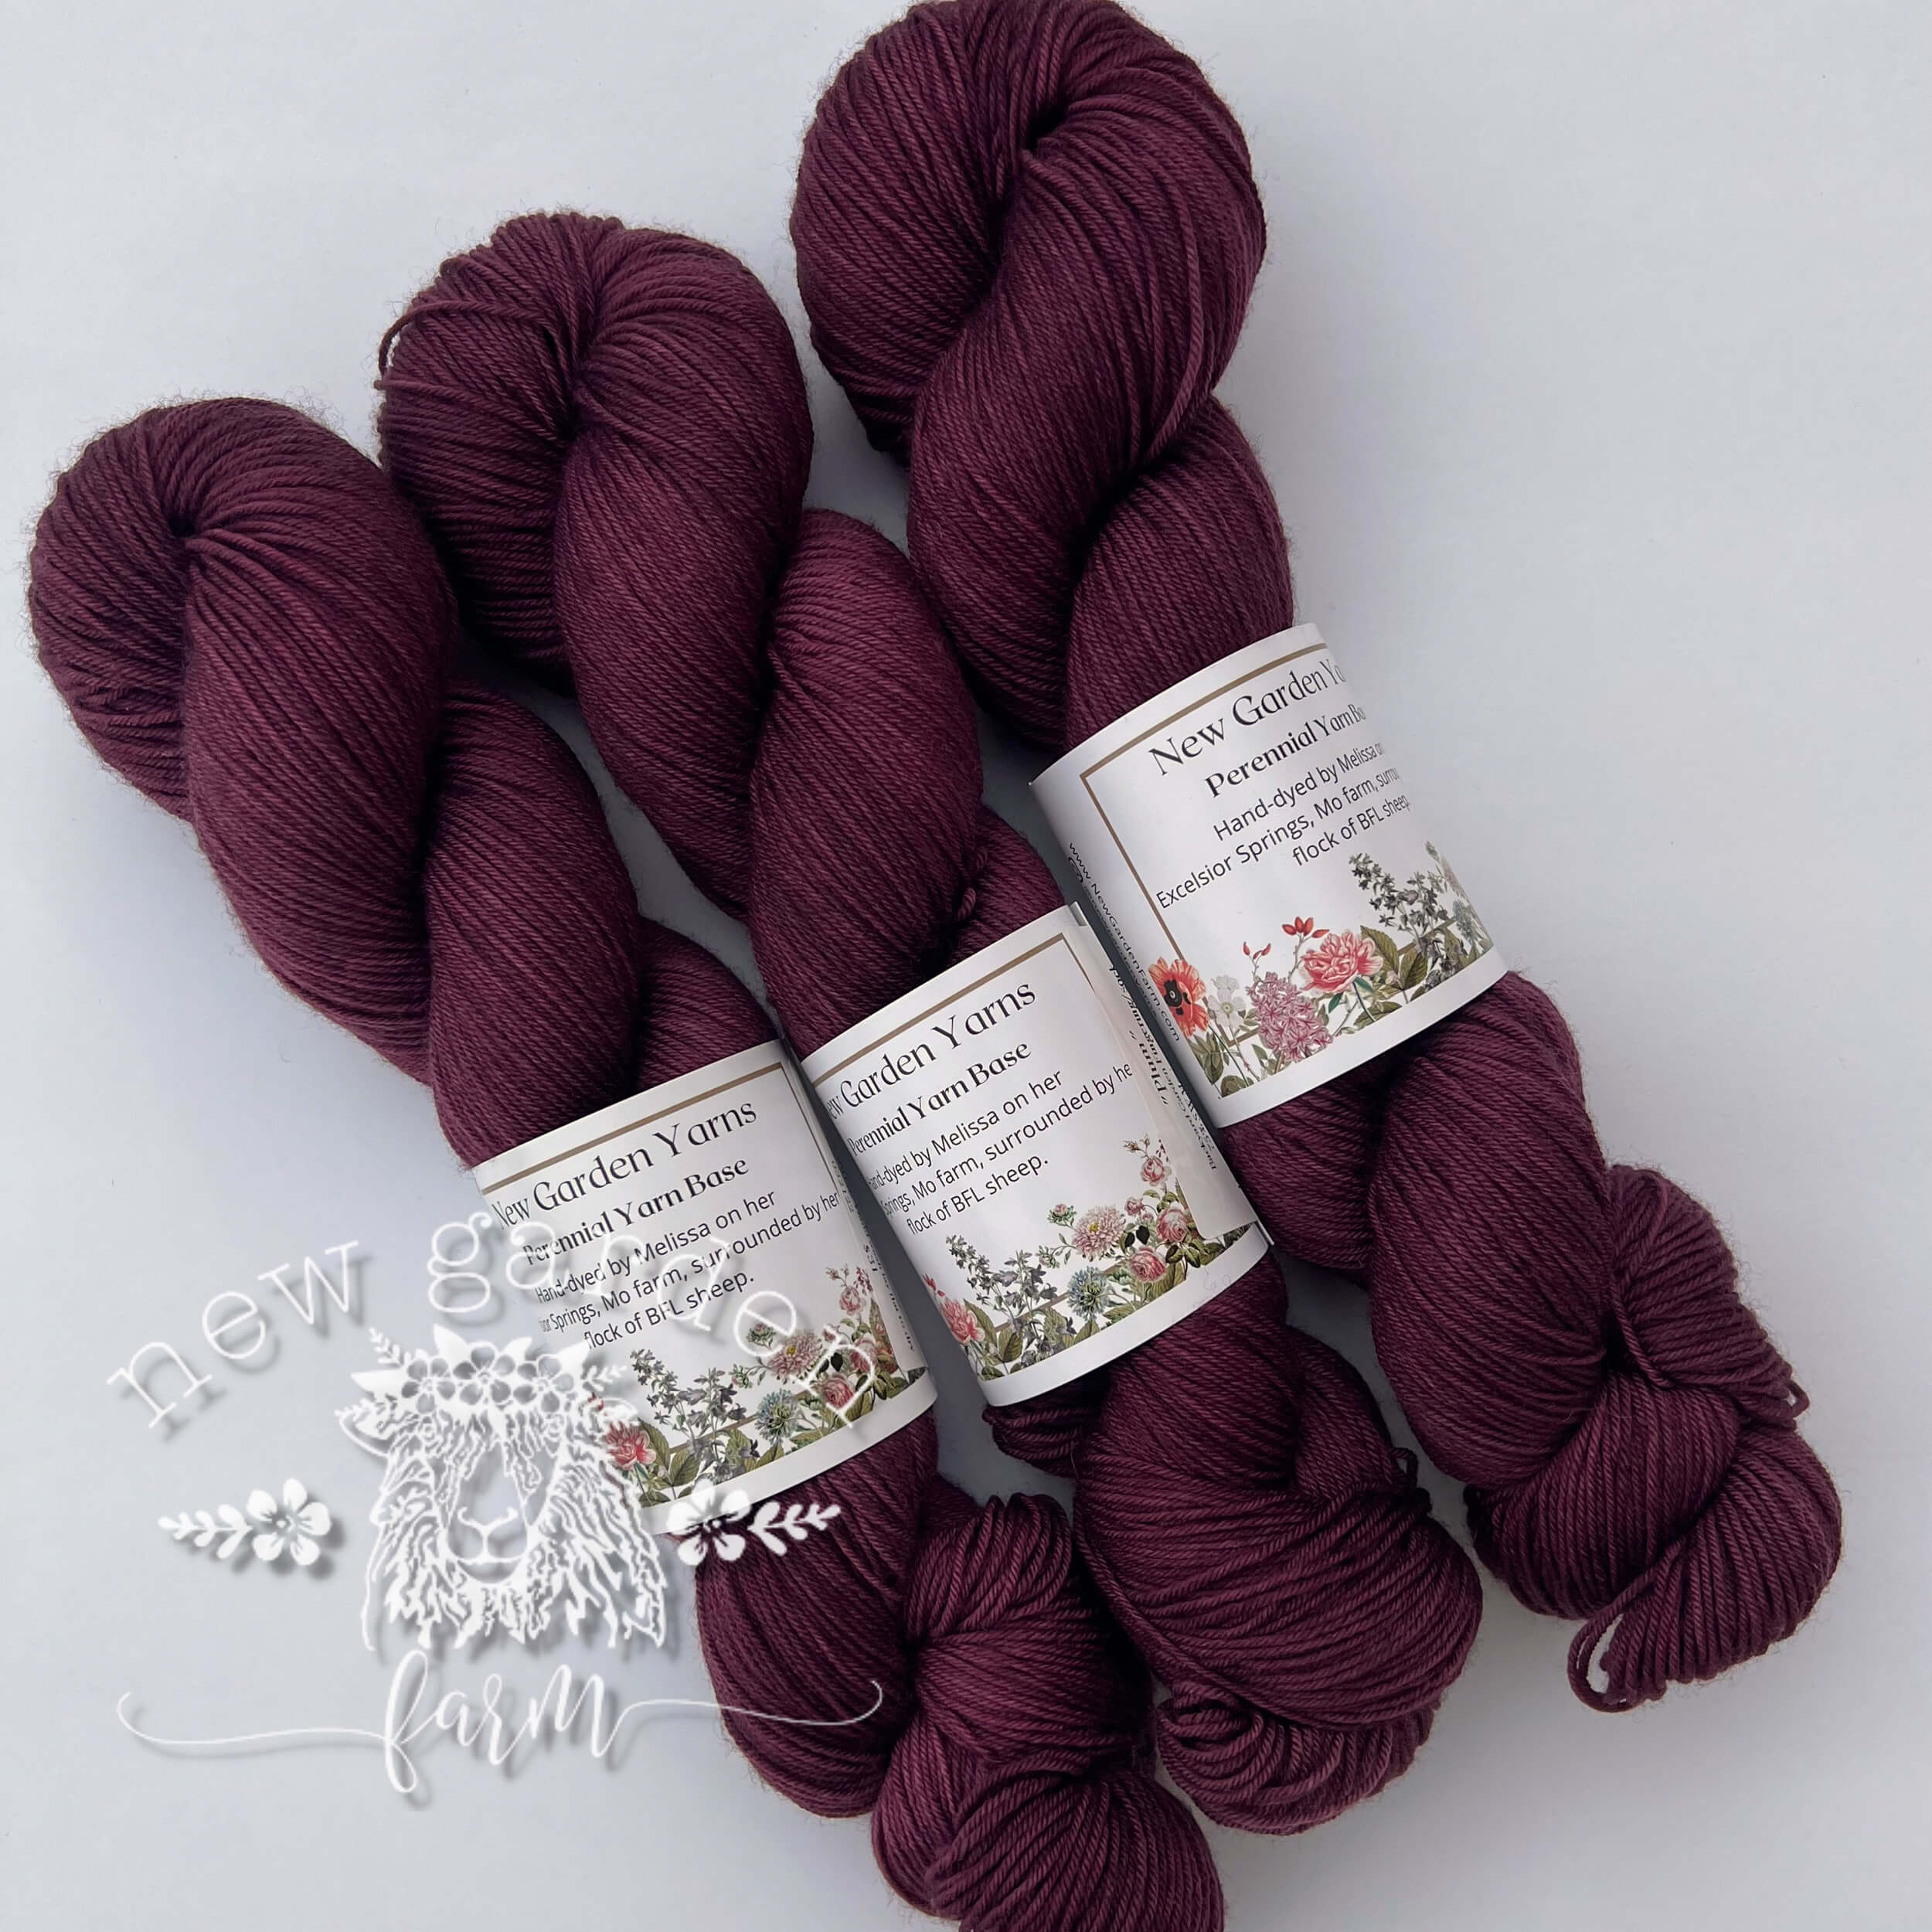 What Is Hand-Dyed Yarn?